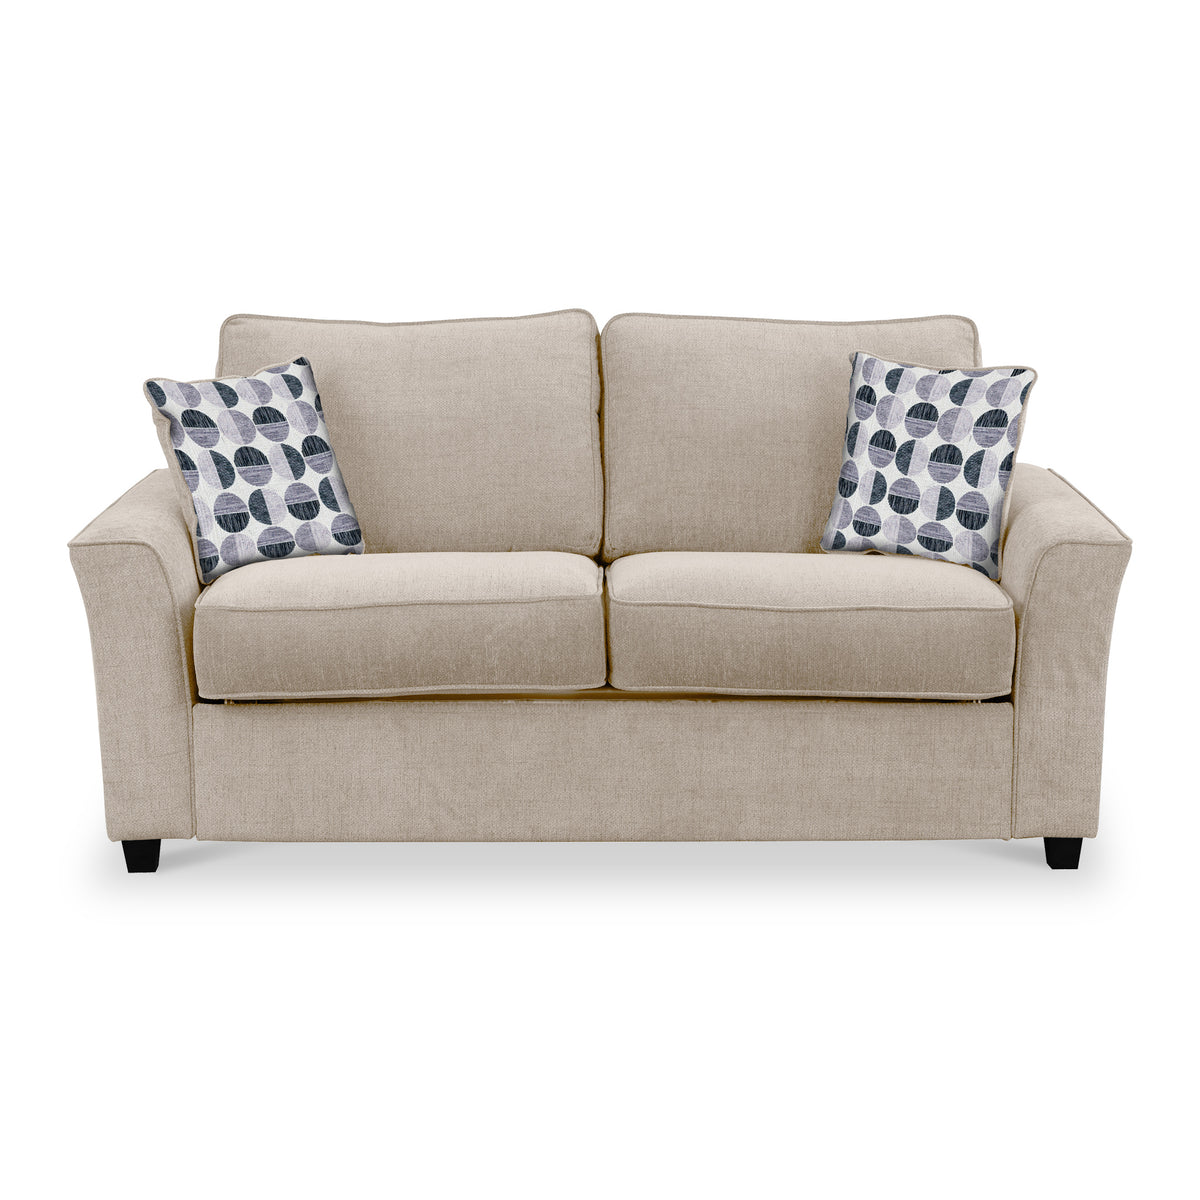 Boston 2 Seater Sofabed in Fawn with Rufus Mono Cushions by Roseland Furniture